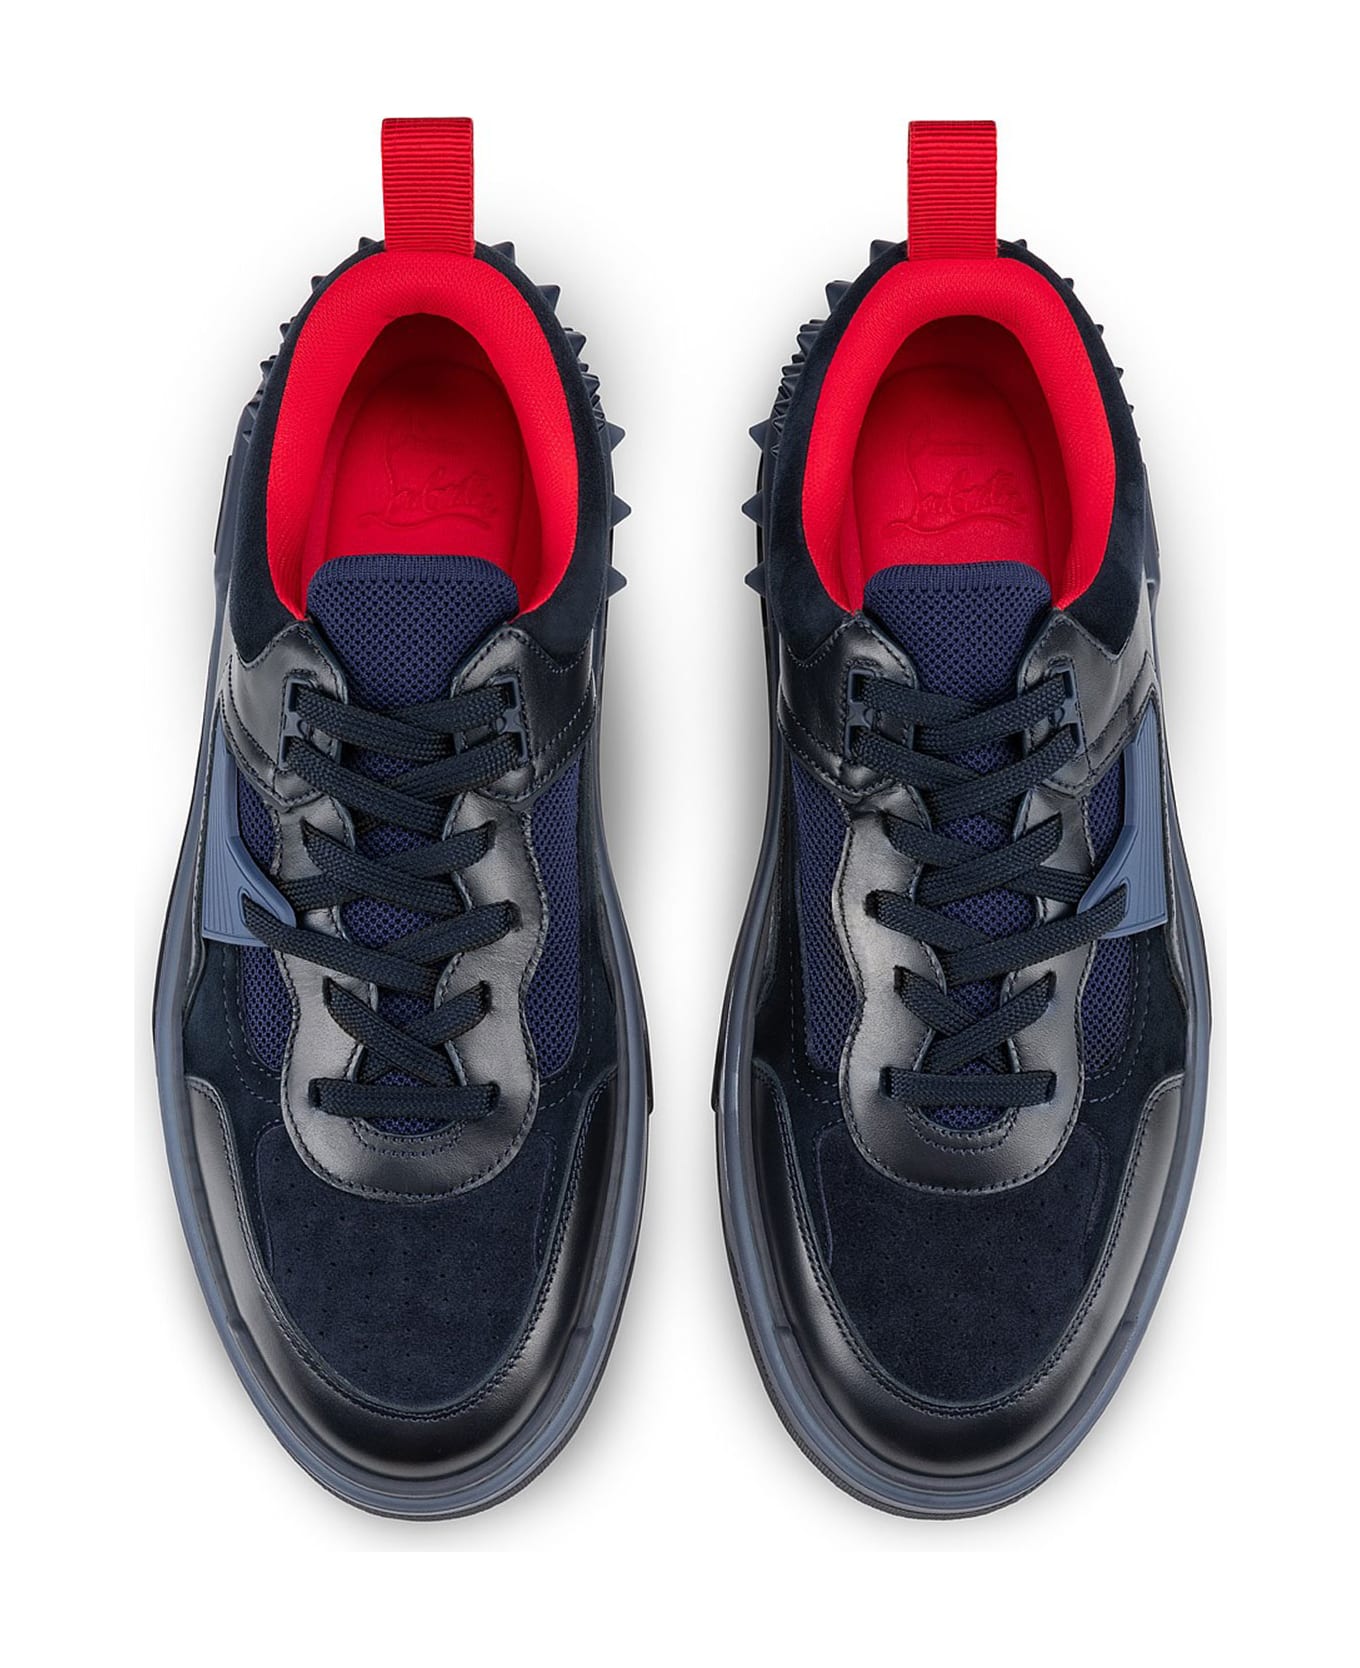 Christian Louboutin Astroloubi Sneakers In Calf Leather And Suede - MARINE